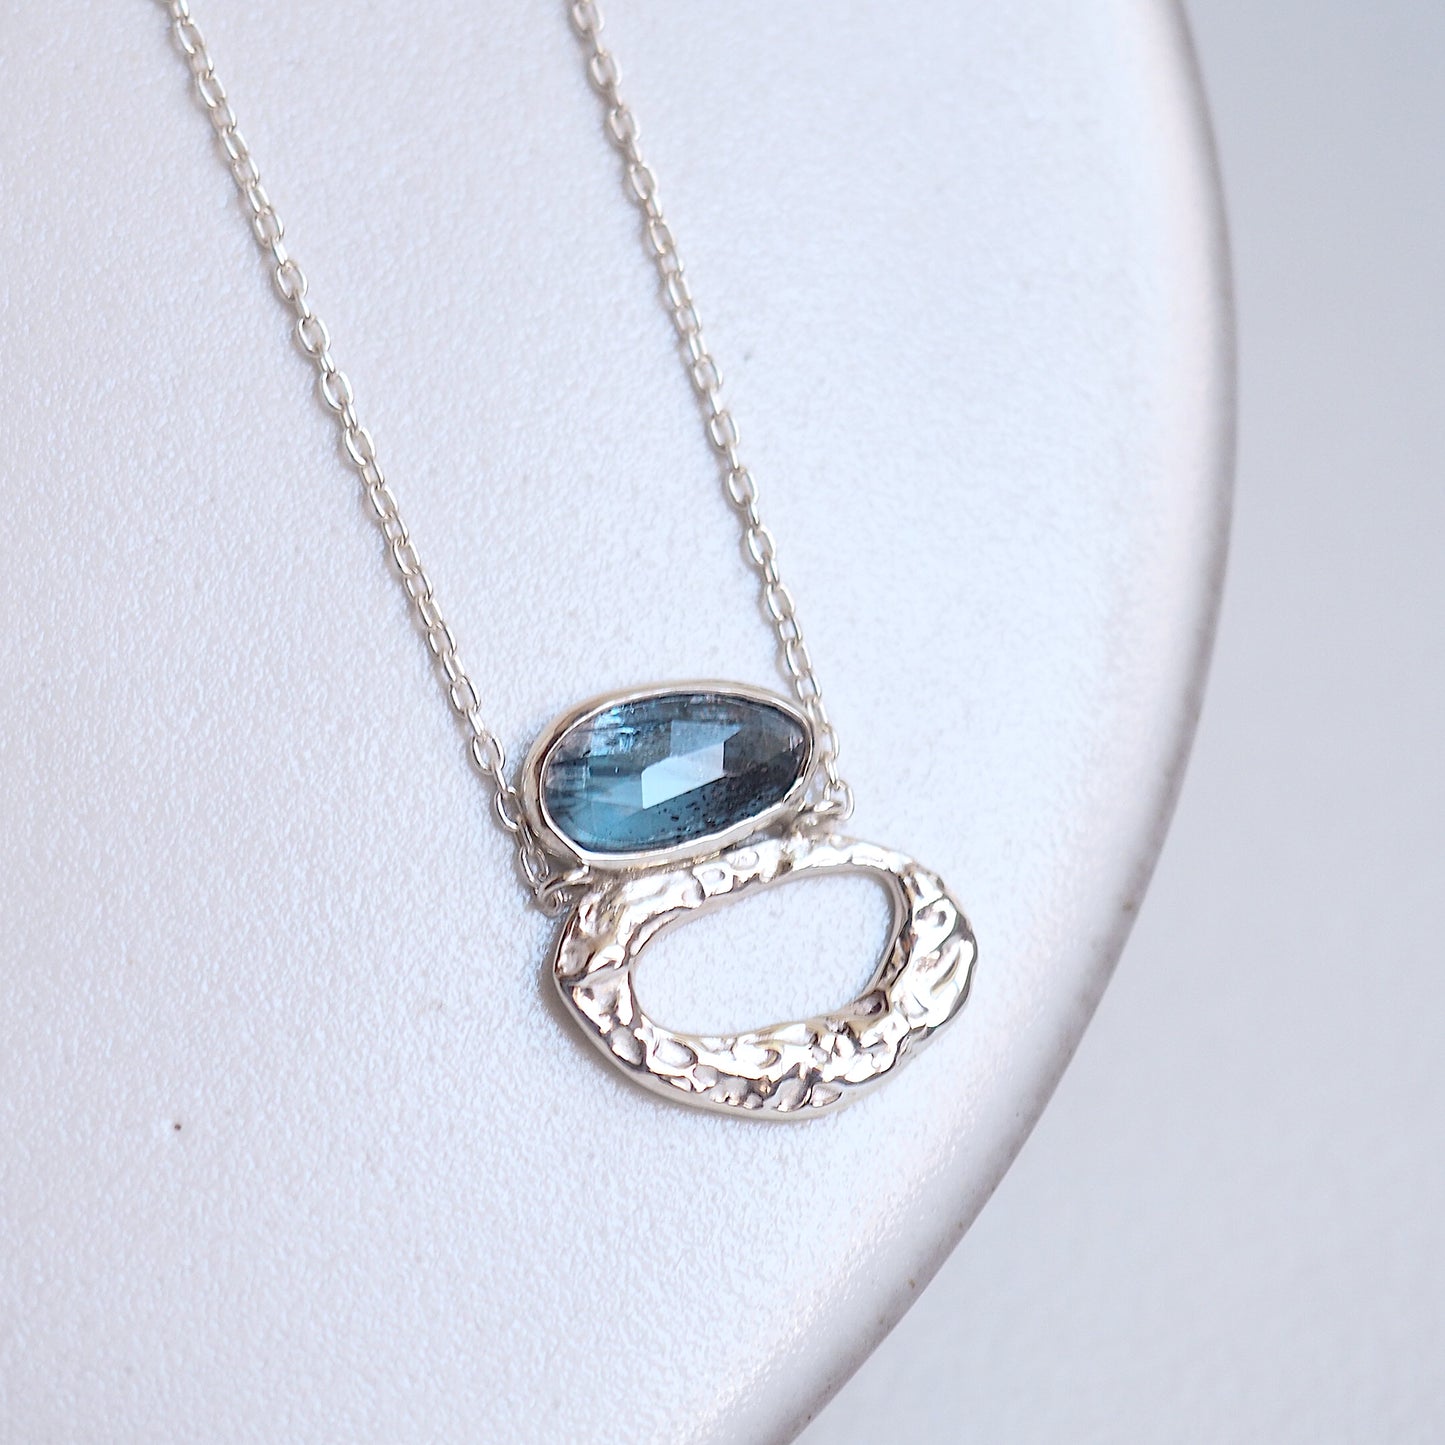 Silver and Kyanite Necklace handcrafted ocean blue stone unique jewelry handmade designer jewels 